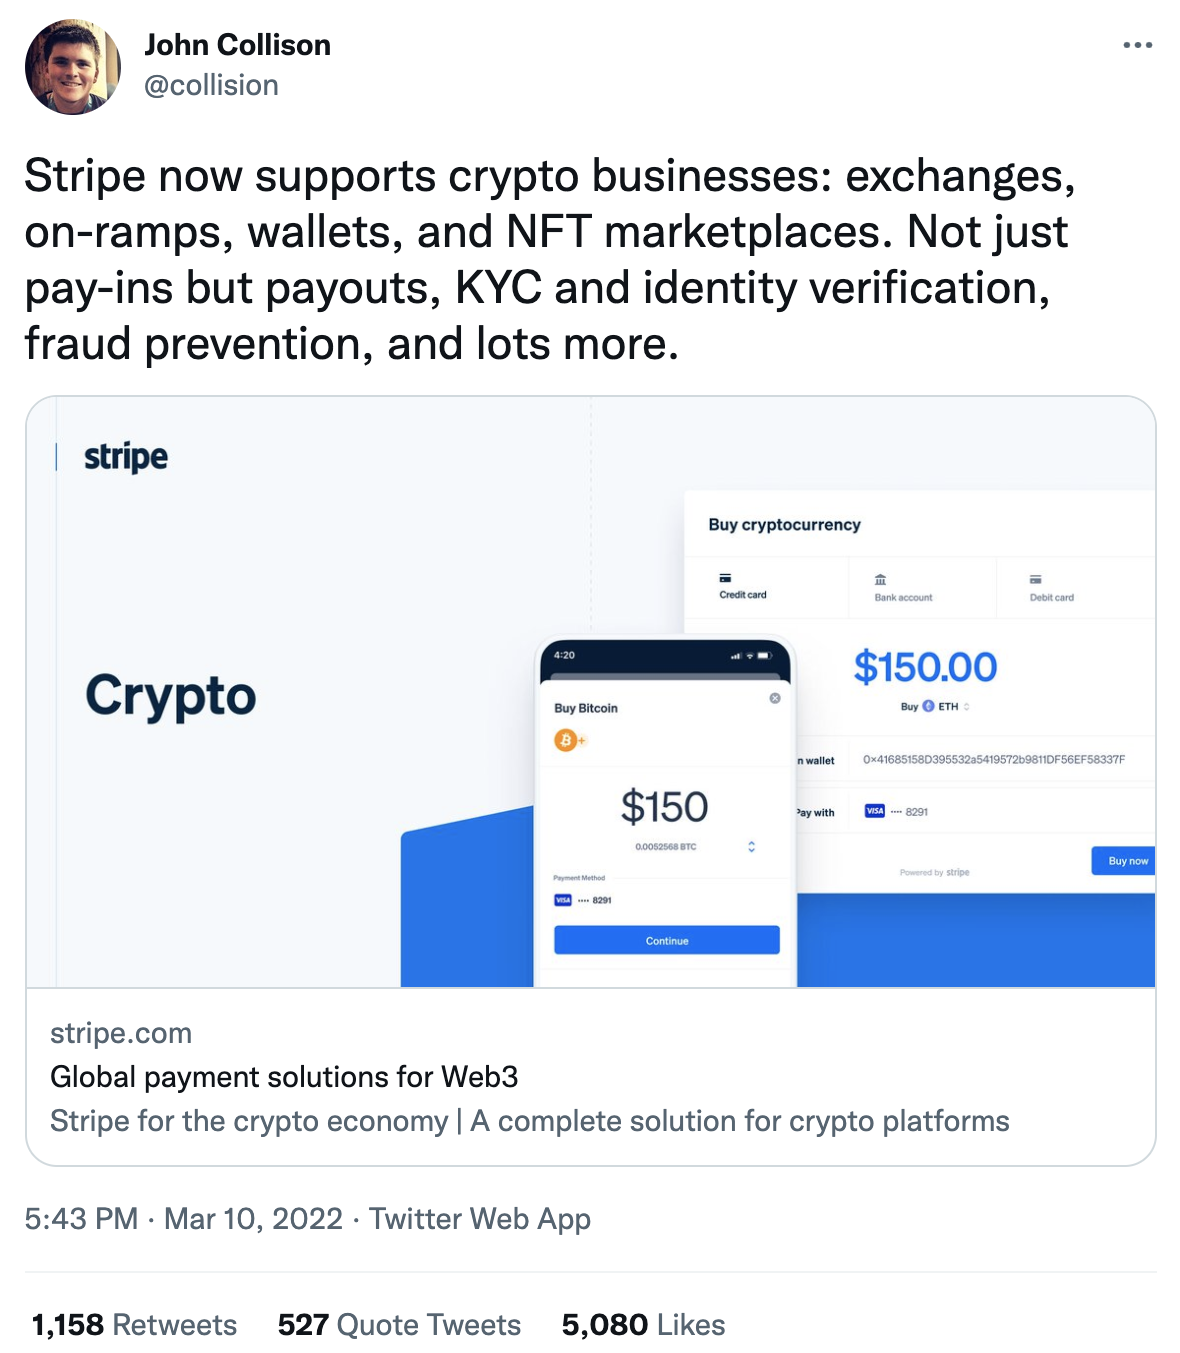 John Collison tweet about Stripe now supporting crypto businesses